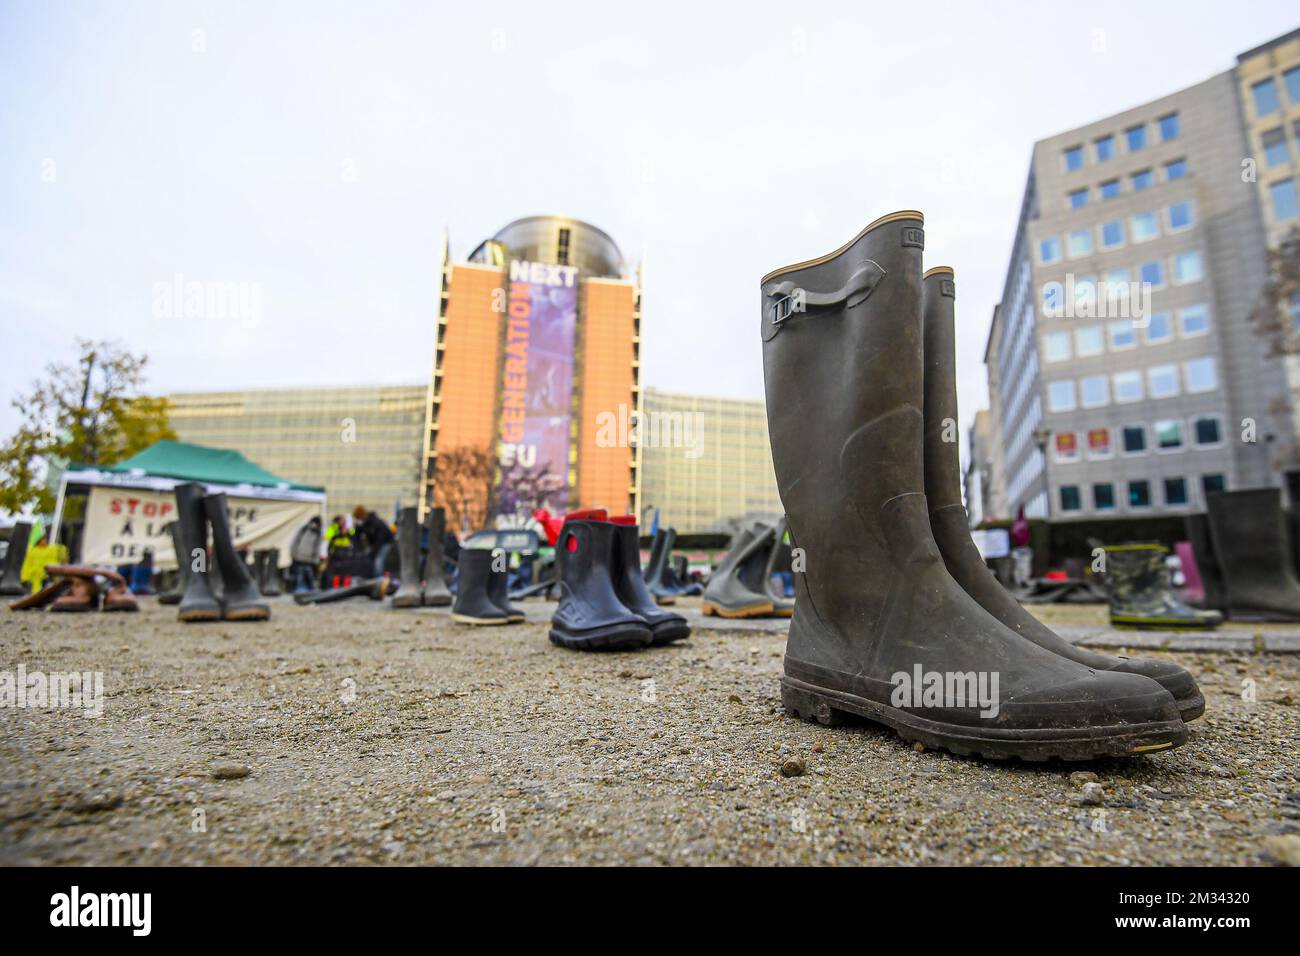 Illustration picture shows a protest action by the Support Network for Peasant Agriculture (ReSAP), Agroecology in Action, Youth for Climate and around fifteen other organizations, in the center of the European area, in Brussels, Sunday 06 December 2020. The protesters denounce the inconsistency between the agricultural, trade and environmental policies of the European Union by install the shoes and boots of farmers who have disappeared against the European institutions. For the farmers' movement, the ratification of the EU-Mercosur free trade treaty and the CAP reform project condemn nourishi Stock Photo